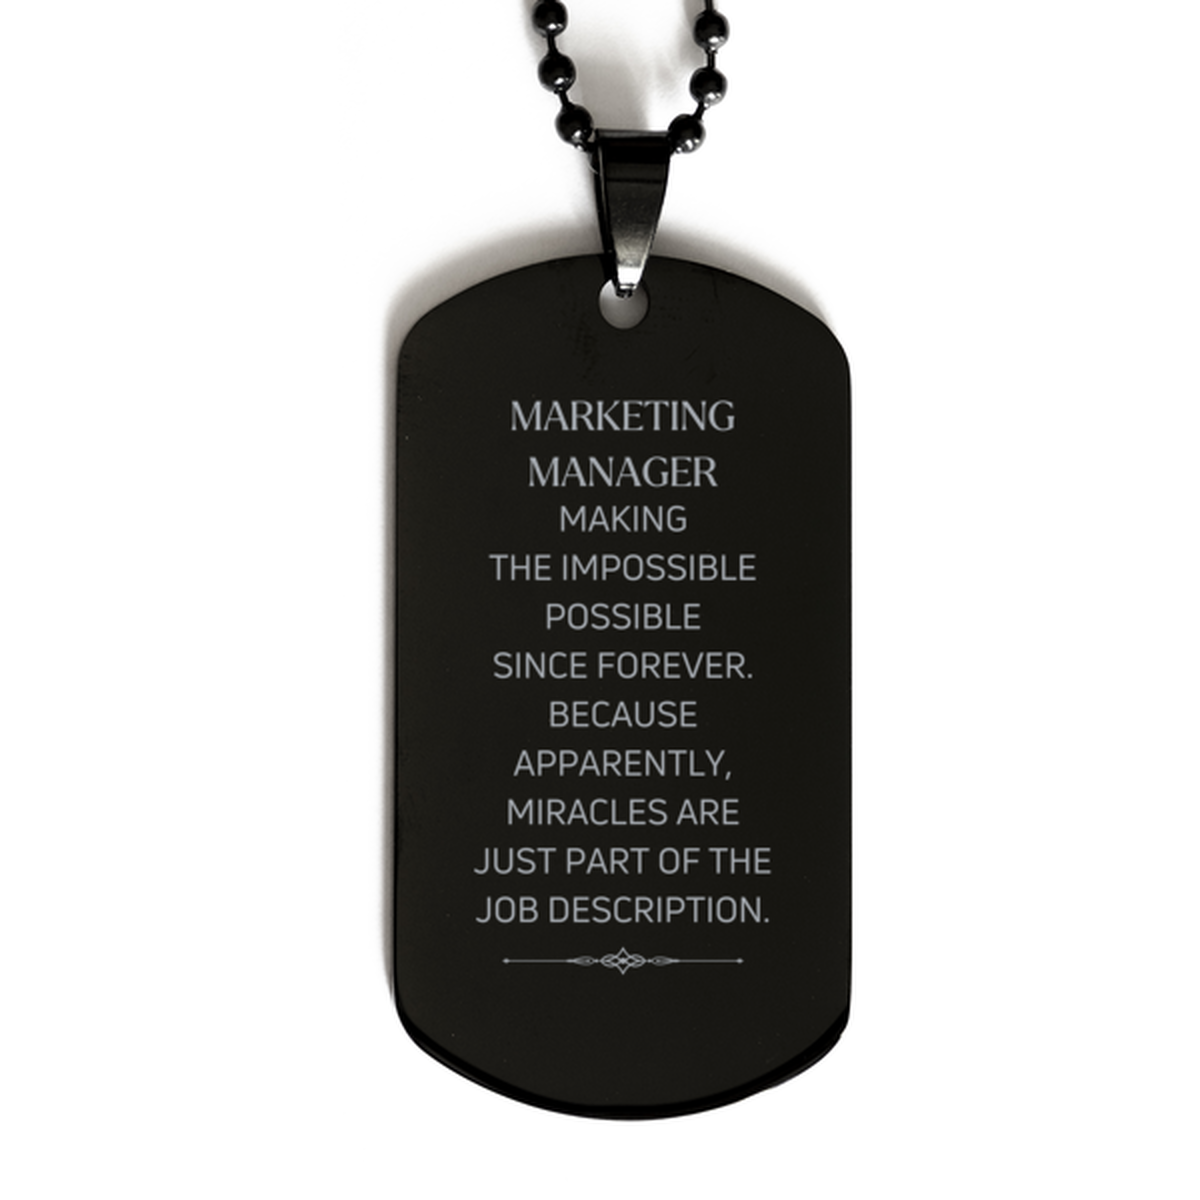 Funny Marketing Manager Gifts, Miracles are just part of the job description, Inspirational Birthday Black Dog Tag For Marketing Manager, Men, Women, Coworkers, Friends, Boss